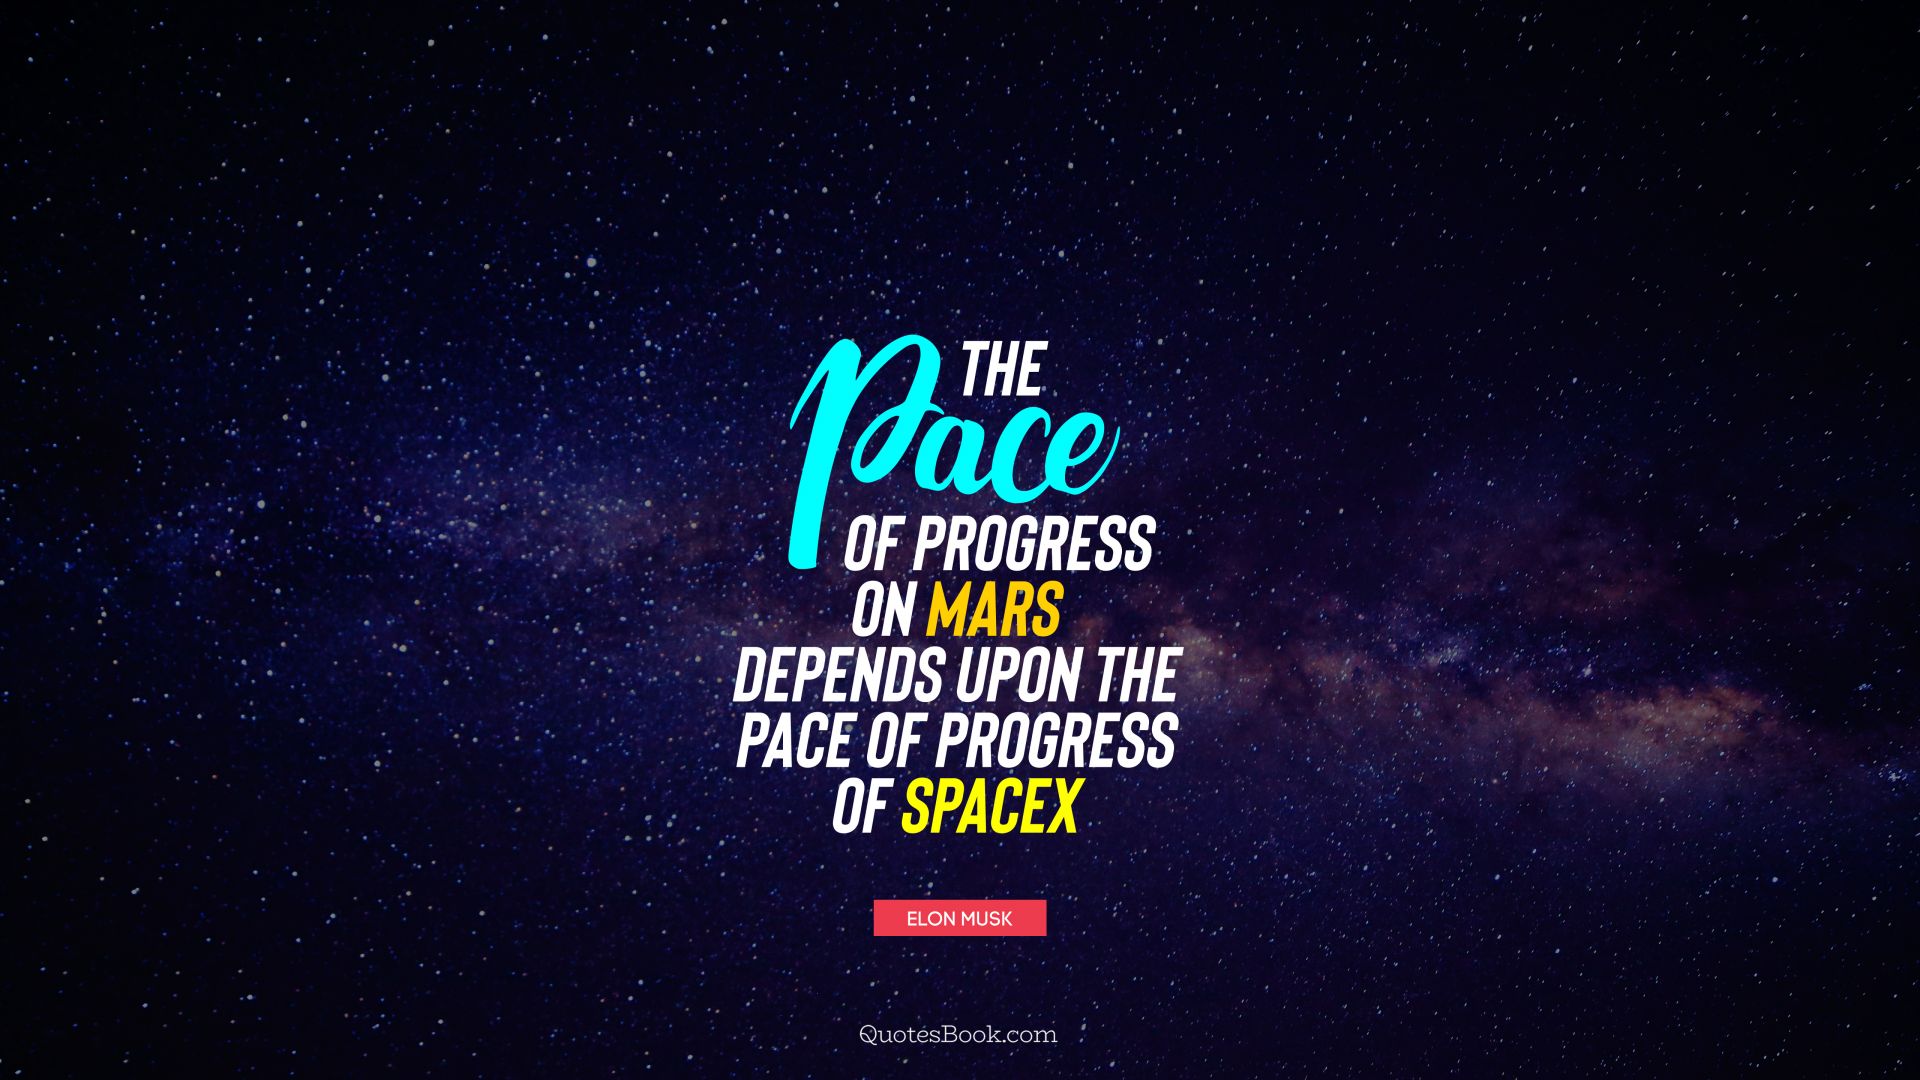 The pace of progress on Mars depends upon the pace of progress of SpaceX. - Quote by Elon Musk